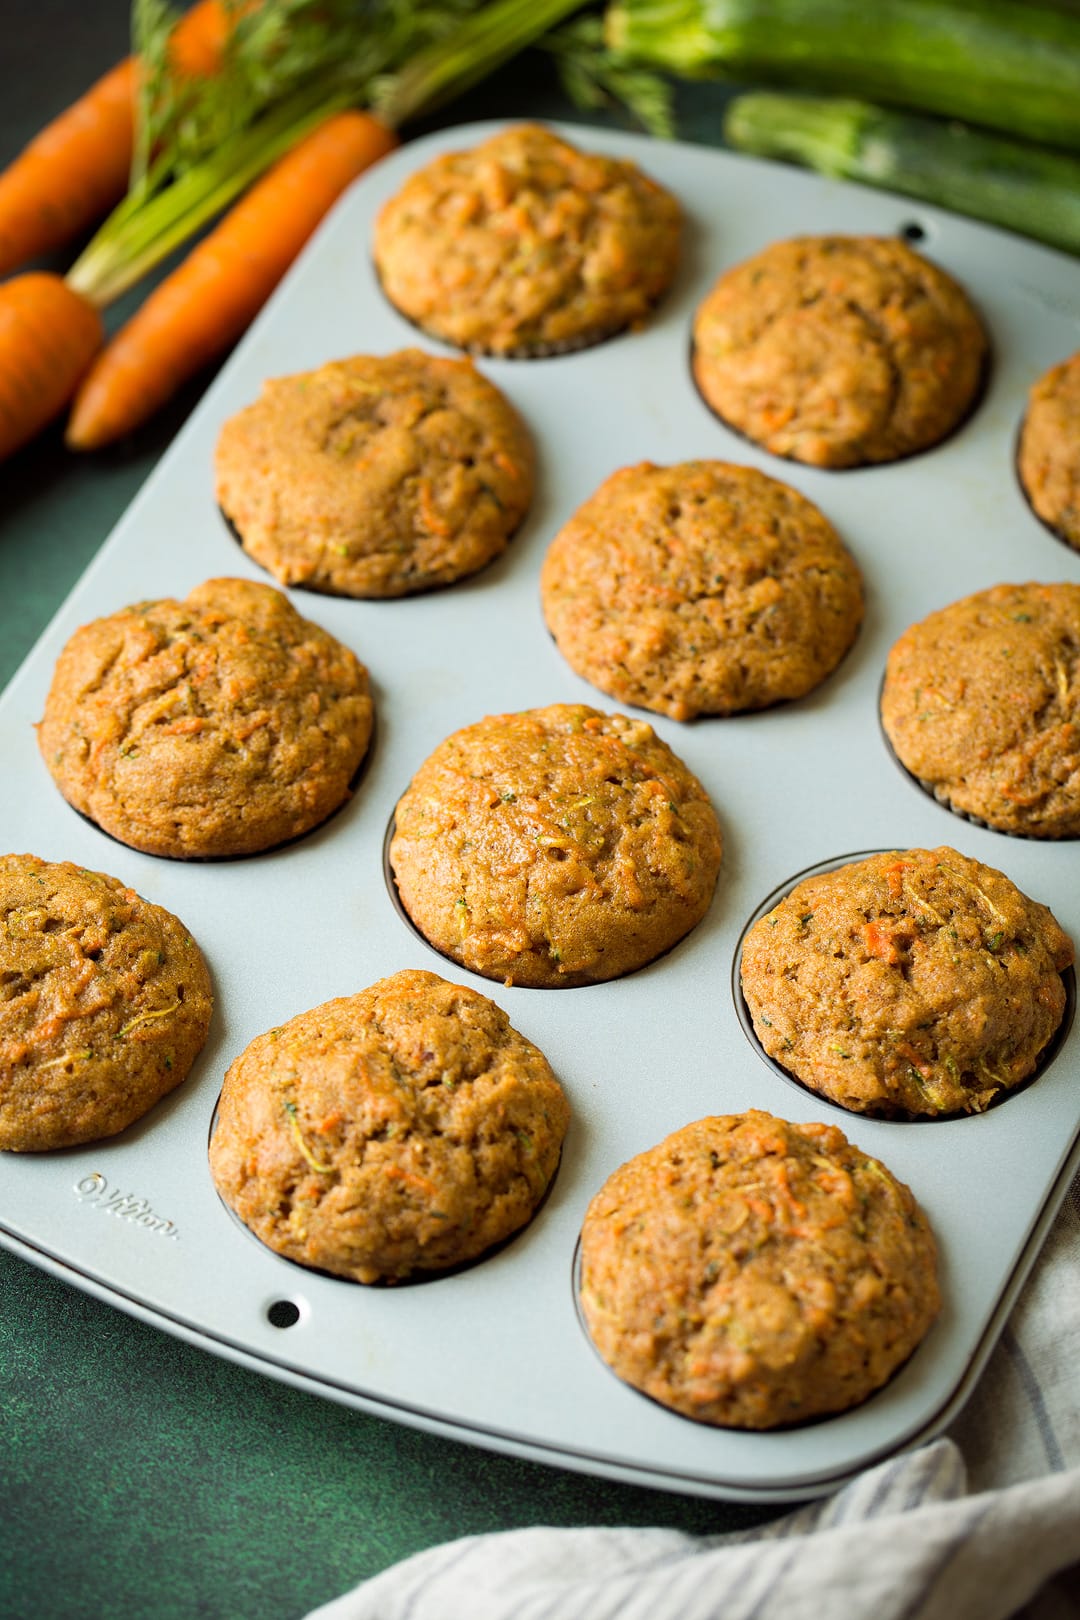 Muffins with Zucchini Carrots and Spices